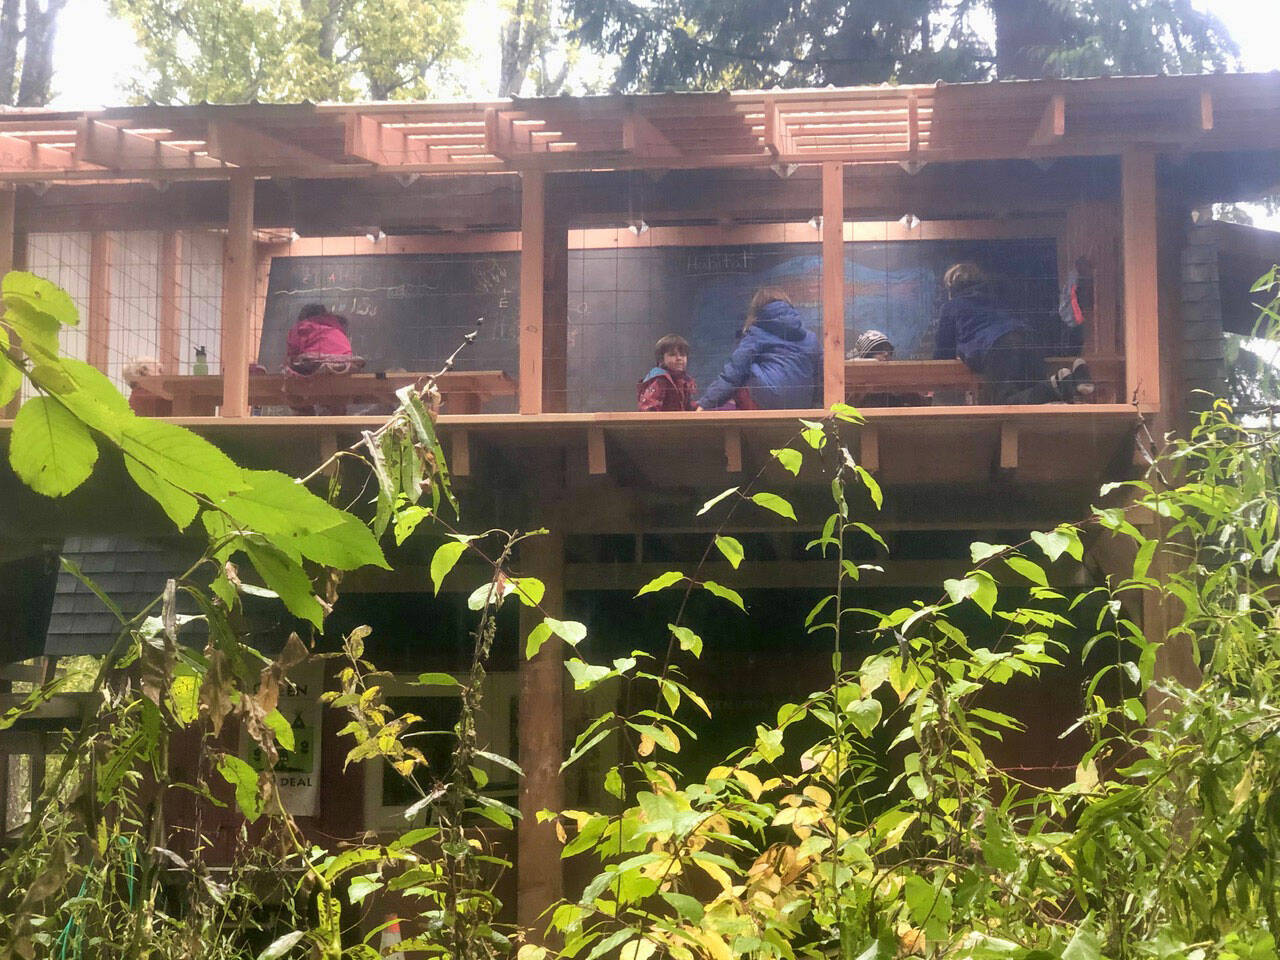 (Dana Schuerholz Photo) “The Lookout” was built in the summer of 2020 to provide a covered open air classroom for students at Vashon Green School in order to have a fully in-person school year at Seedbees Farm, and features an 8 x 12 blackboard . It continues to be Vashon Green School’s main covered space for the <tcxspan tcxhref="20212022" title="Call 2021-2022 via 3CX">2021-2022</tcxspan> school year as well.